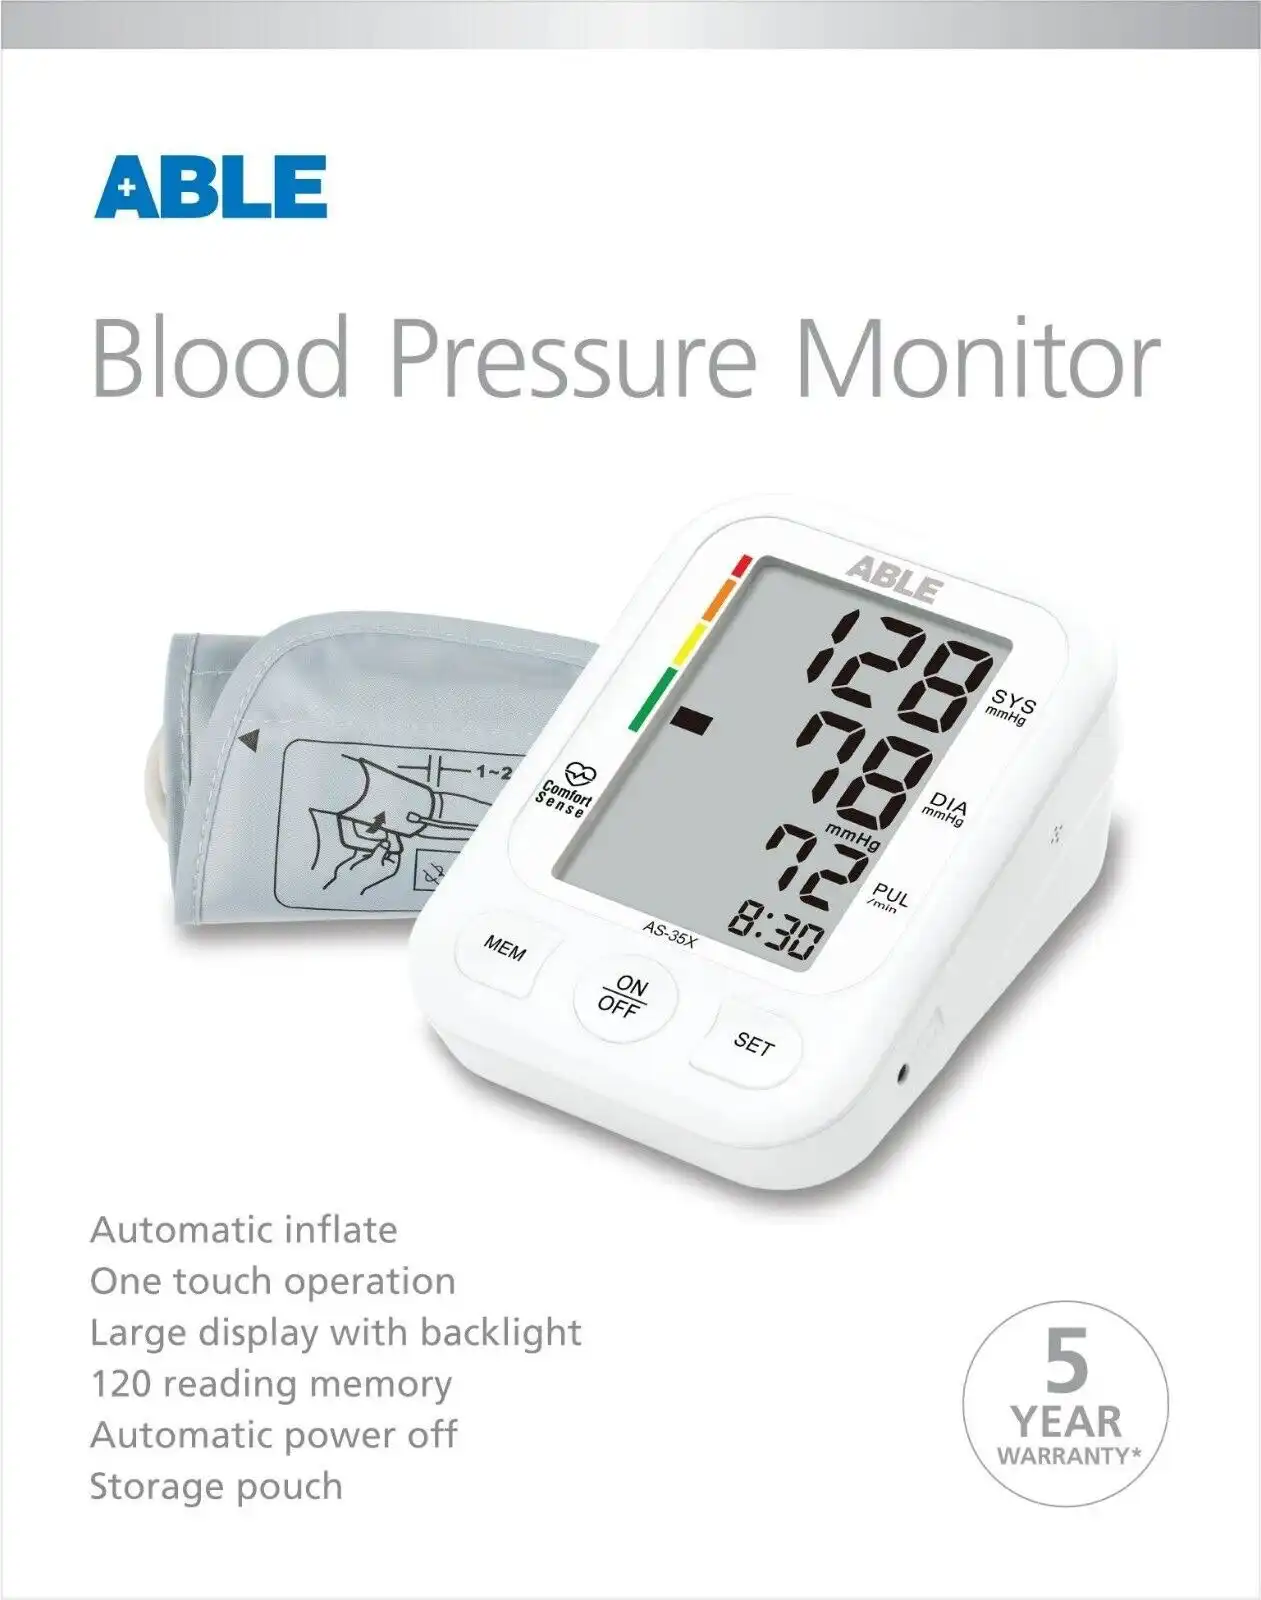 Able Blood Pressure Monitor-Automatic Inflate-Large Display